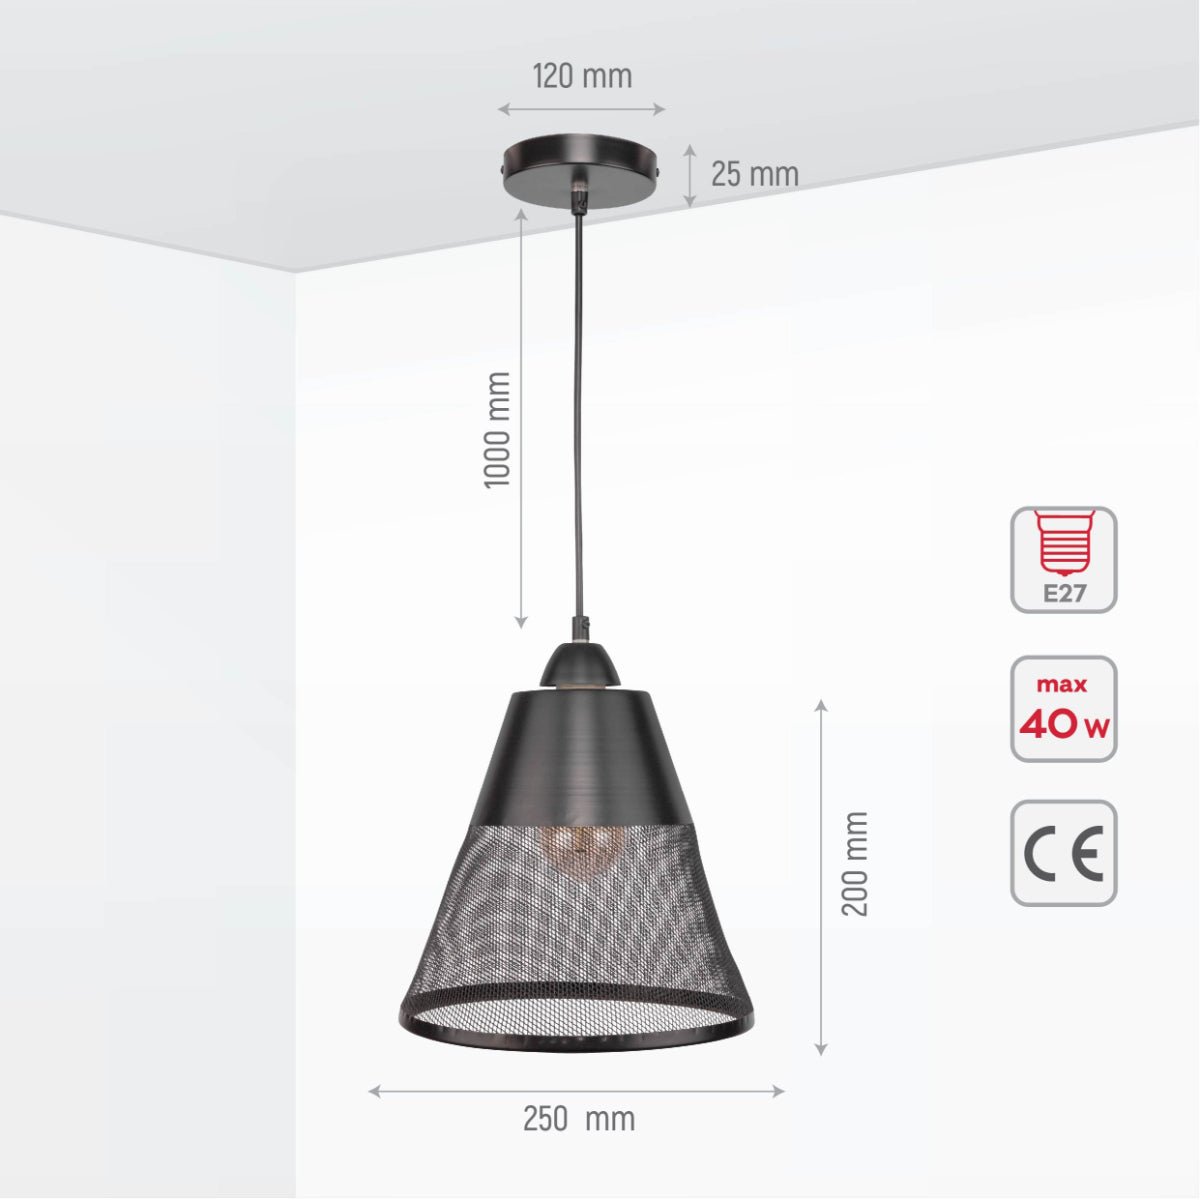 Size and specs of Black Metal Funnel Pendant Ceiling Light with E27 | TEKLED 150-18063